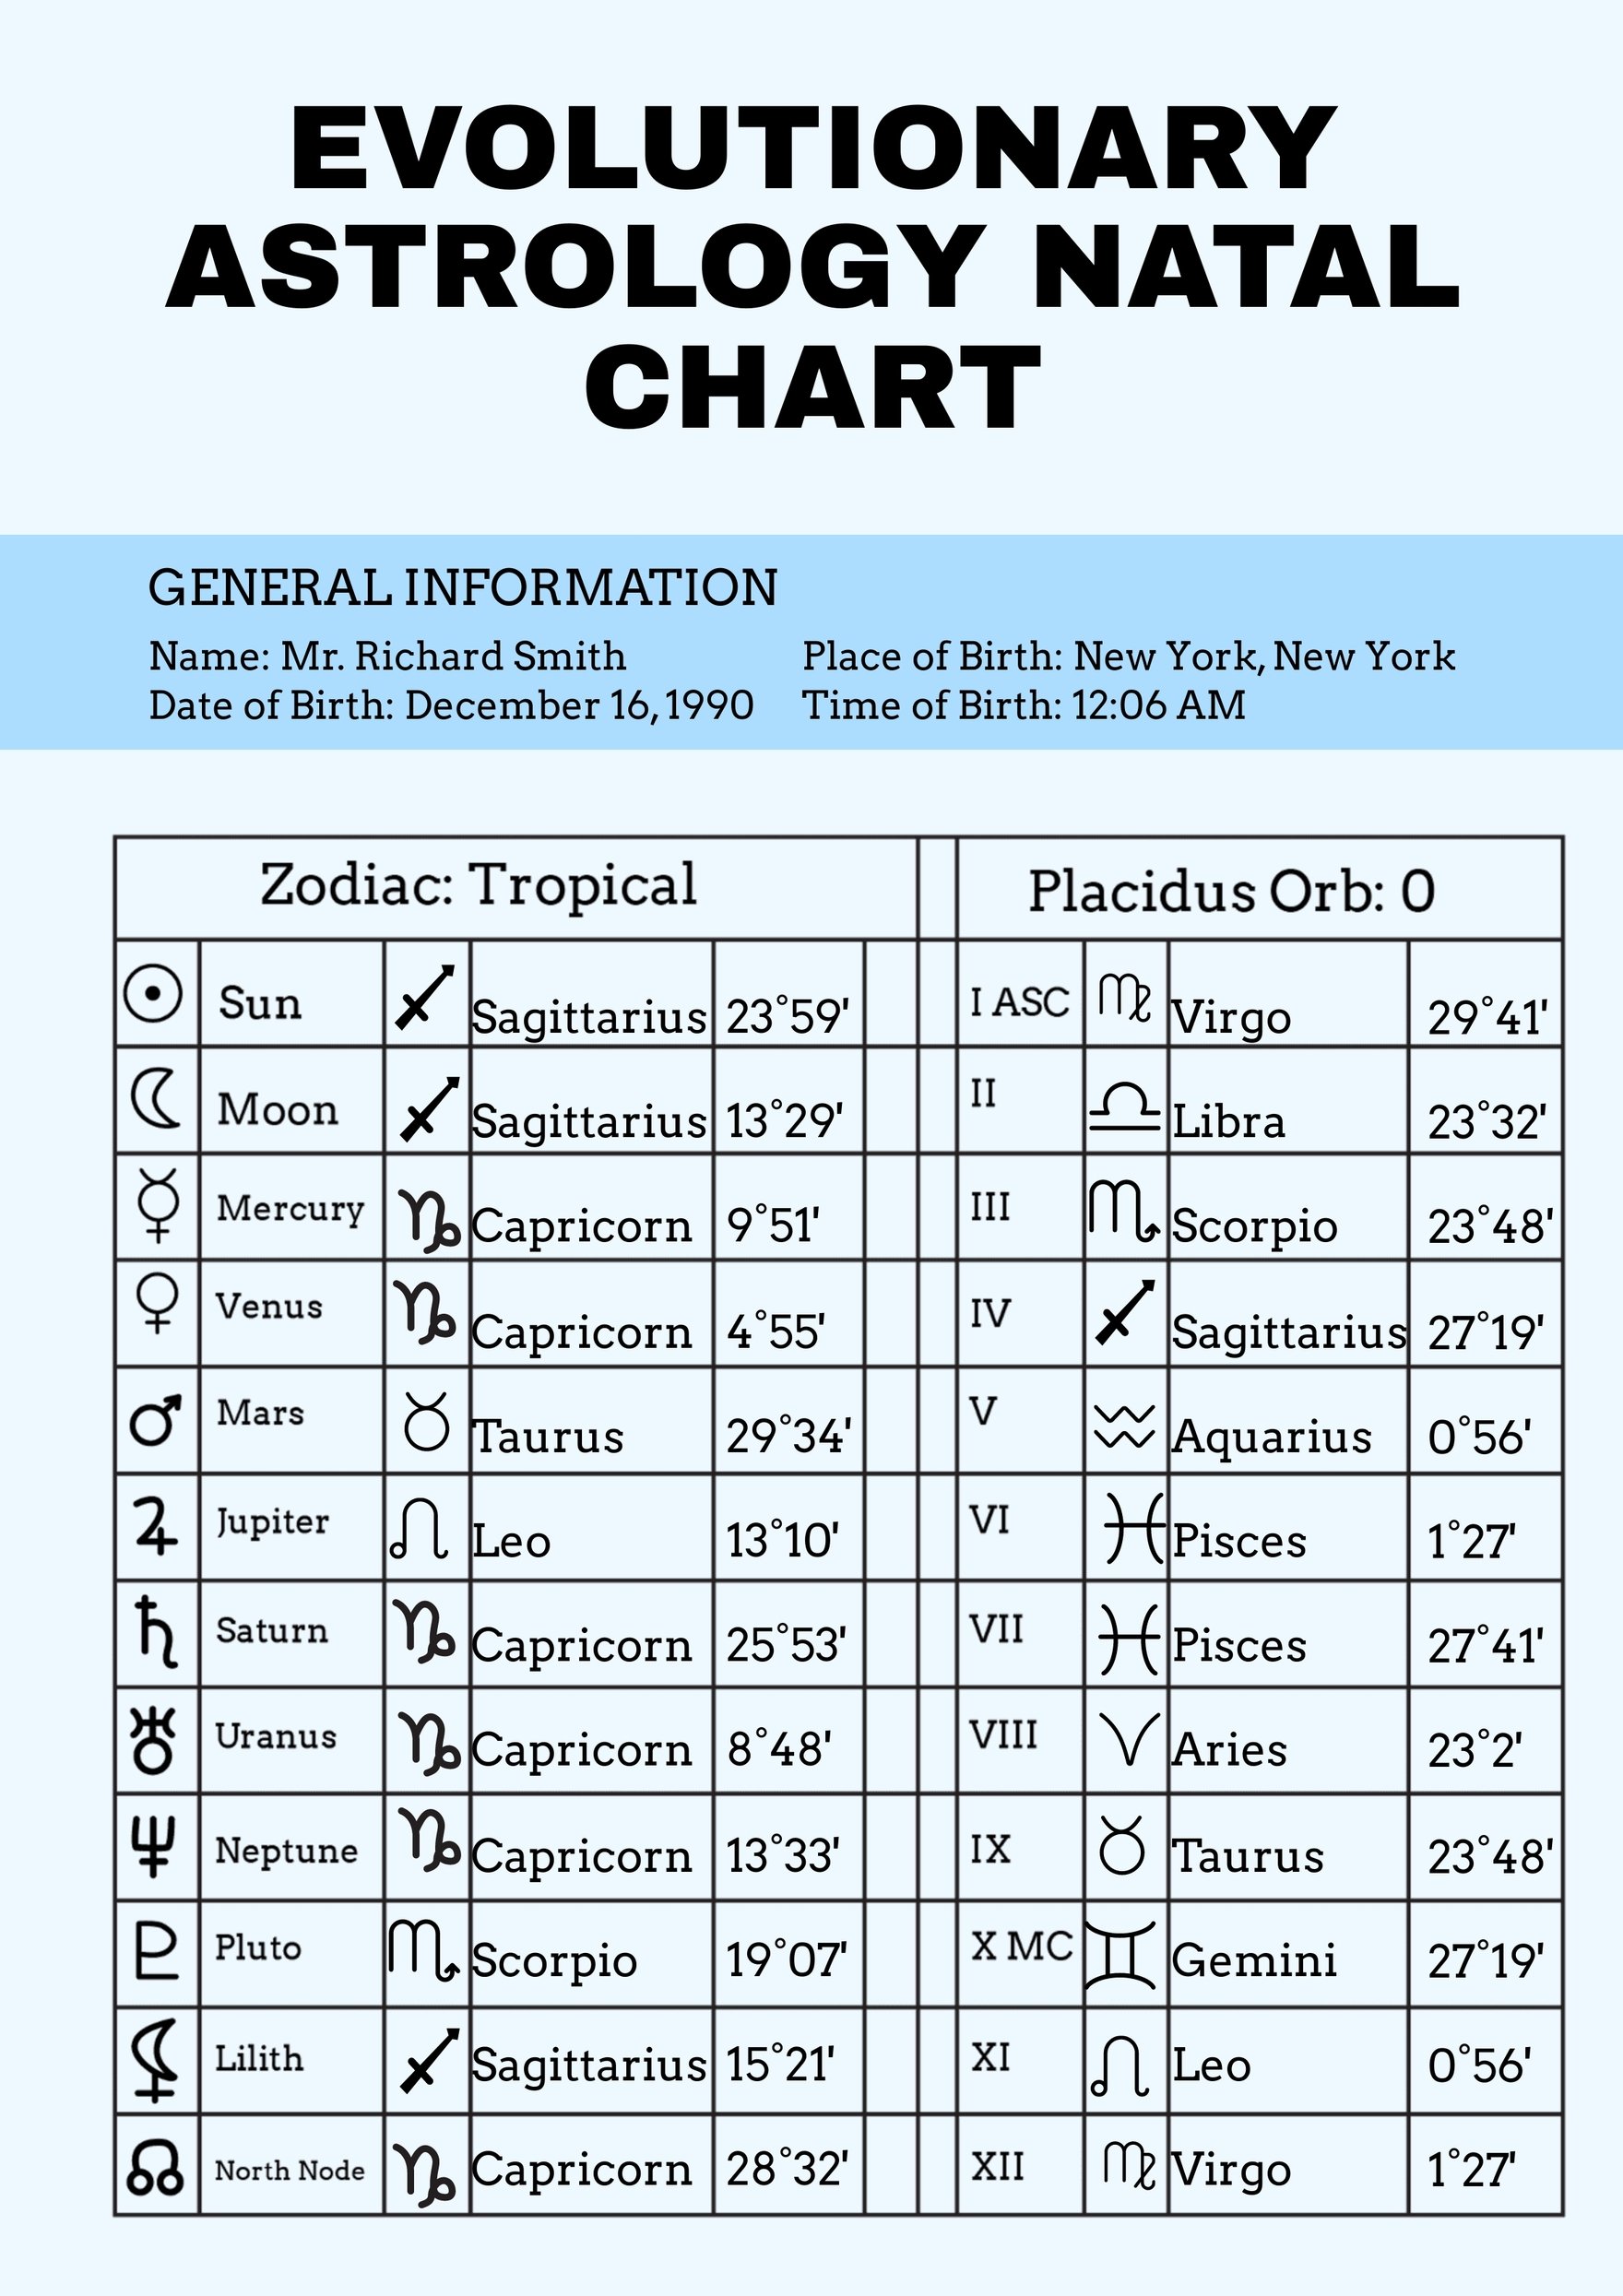 Free Evolutionary Astrology Natal Chart Template Download in PDF